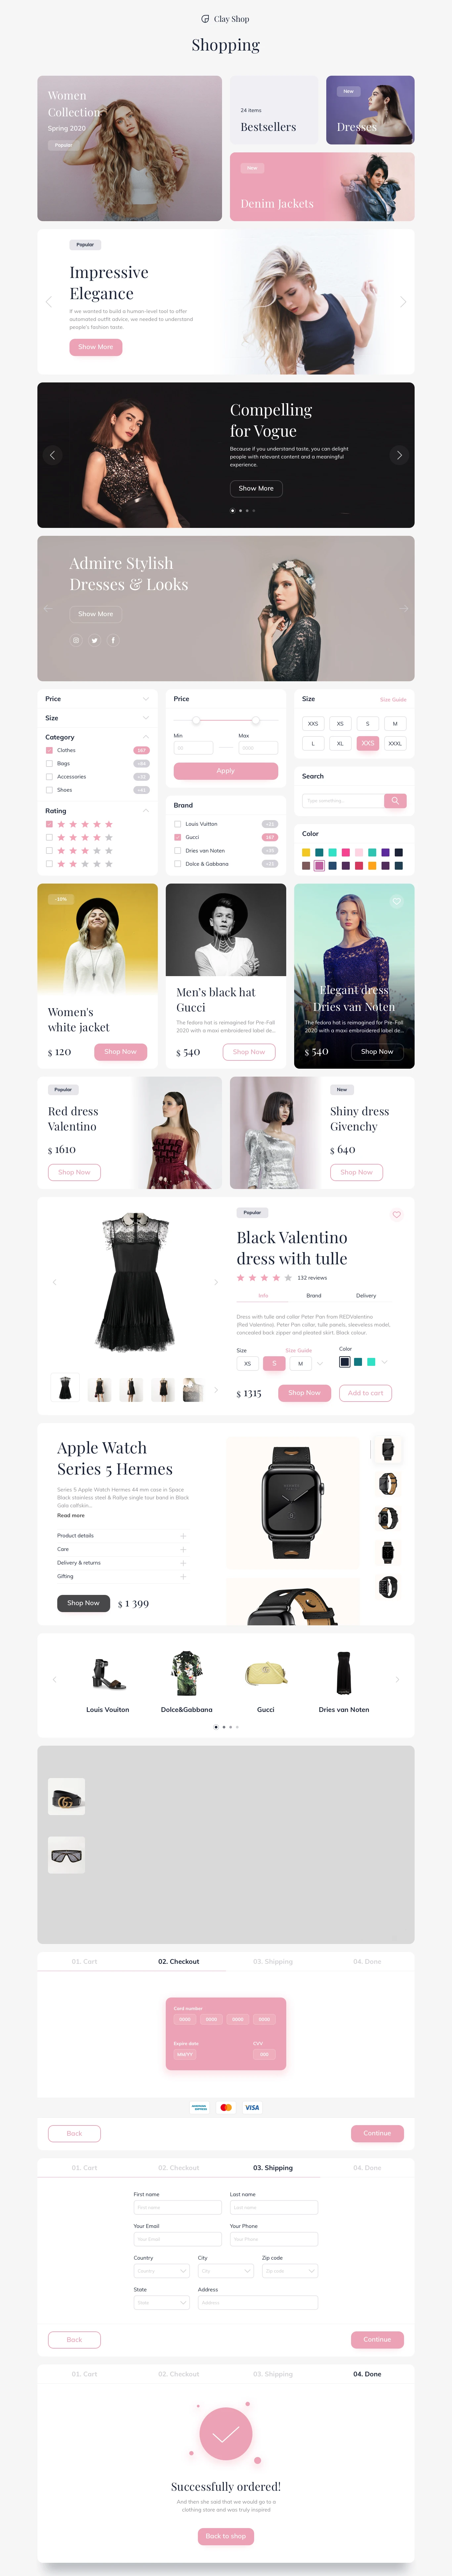 Clay Shop E-commerce UI Kit For Sketch - Ultimate e-commerce UI Kit with 5 pages and 60+ Components. Easy to resize and customize. All components carefully named sorted. With free Google fonts.